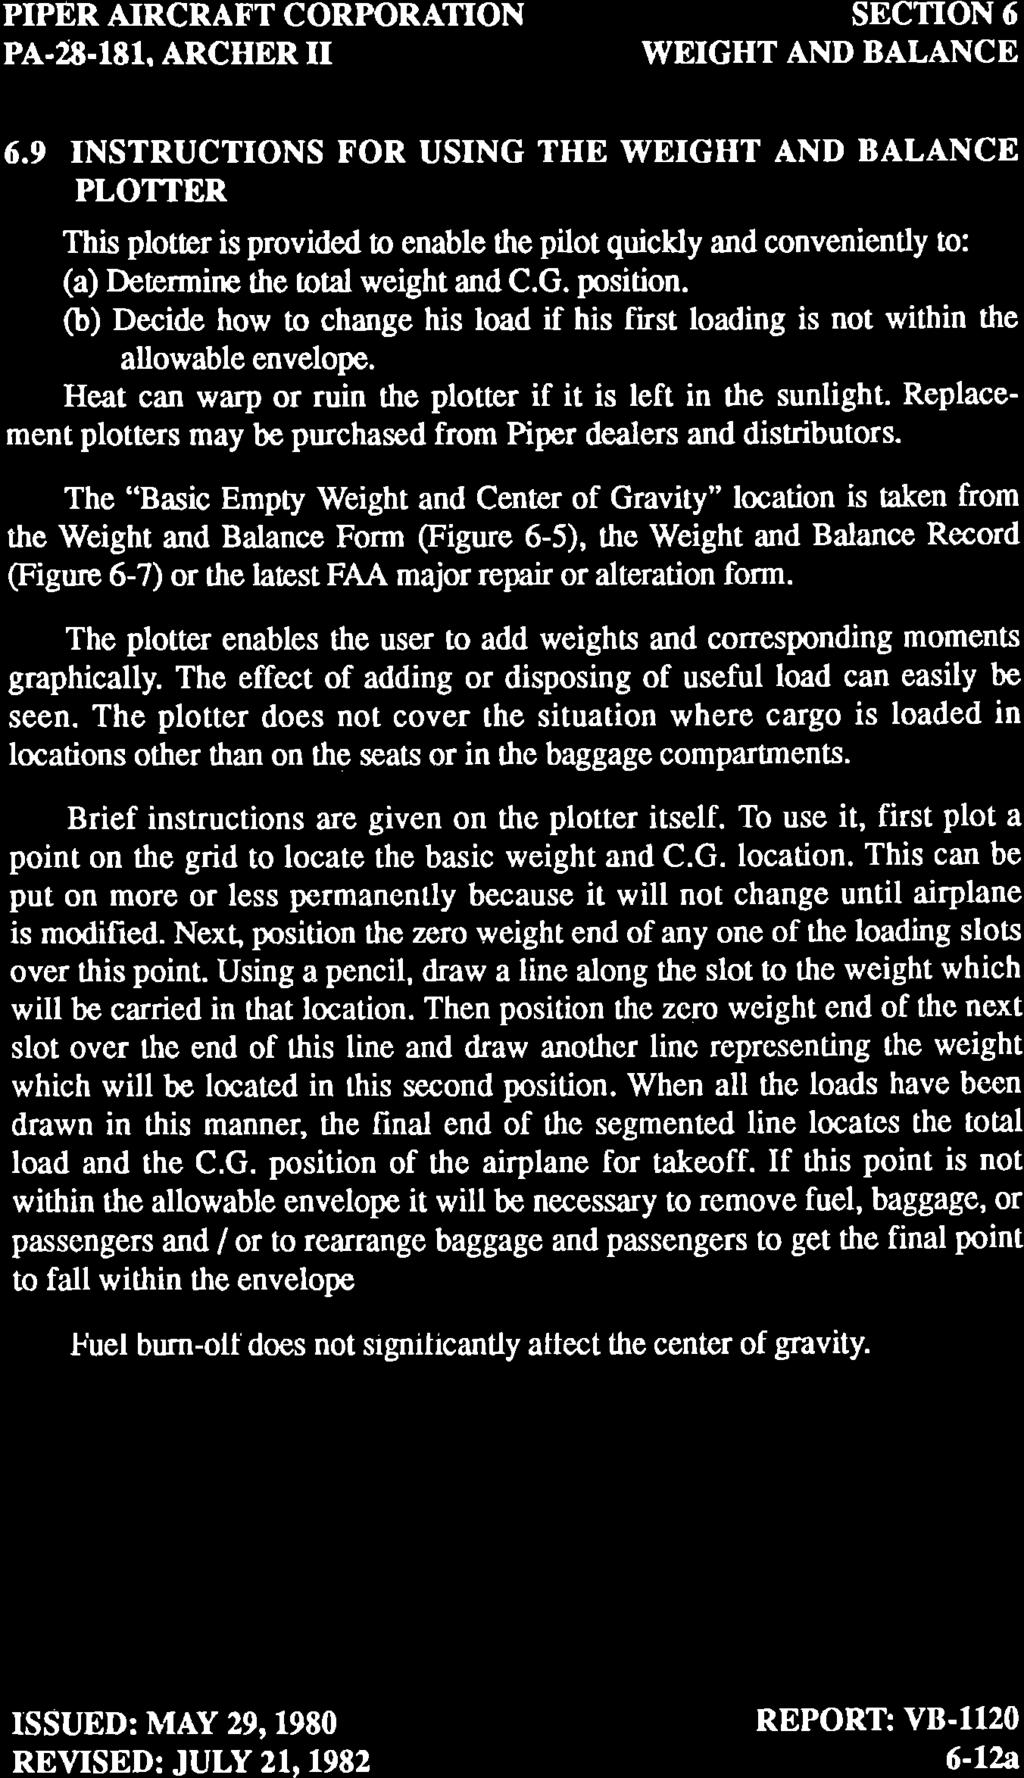 PIPER AIRCRAFT CORFORATION PA.28.18I. ARCHERII 6.9 INSTRUCTIONS FOR USING THE PLOTTER This plotter is provided to enable ttre pilot quickly and conveniently to: (a) Determirn the total weight and C.G. position.